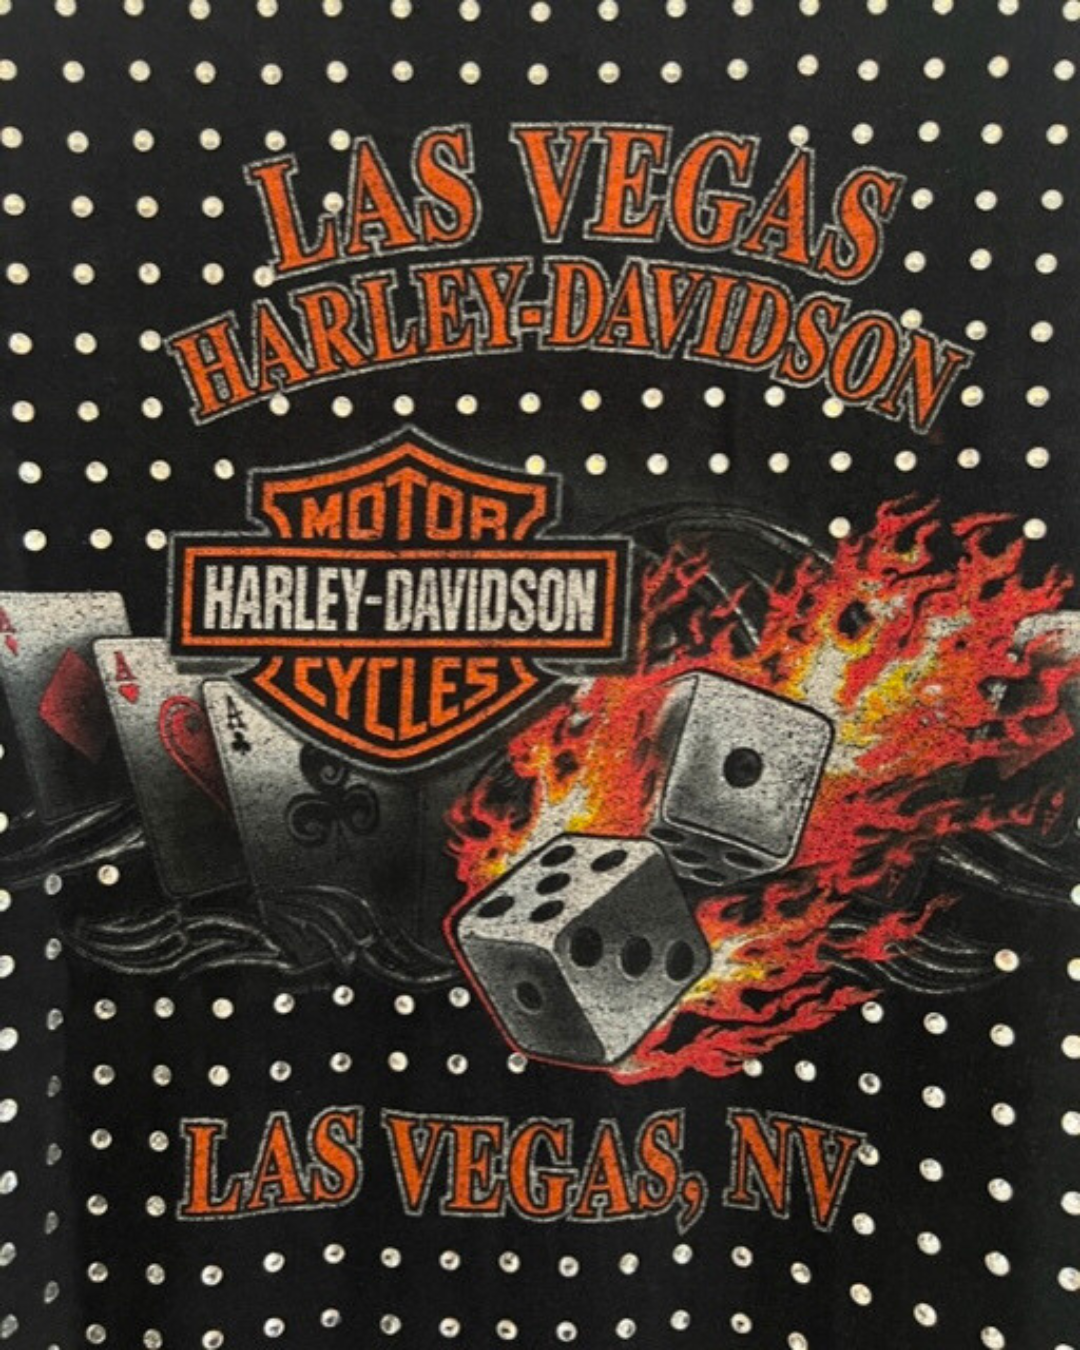 Vintage Black HARLEY DAVIDSON T-shirt with all over diamante studs